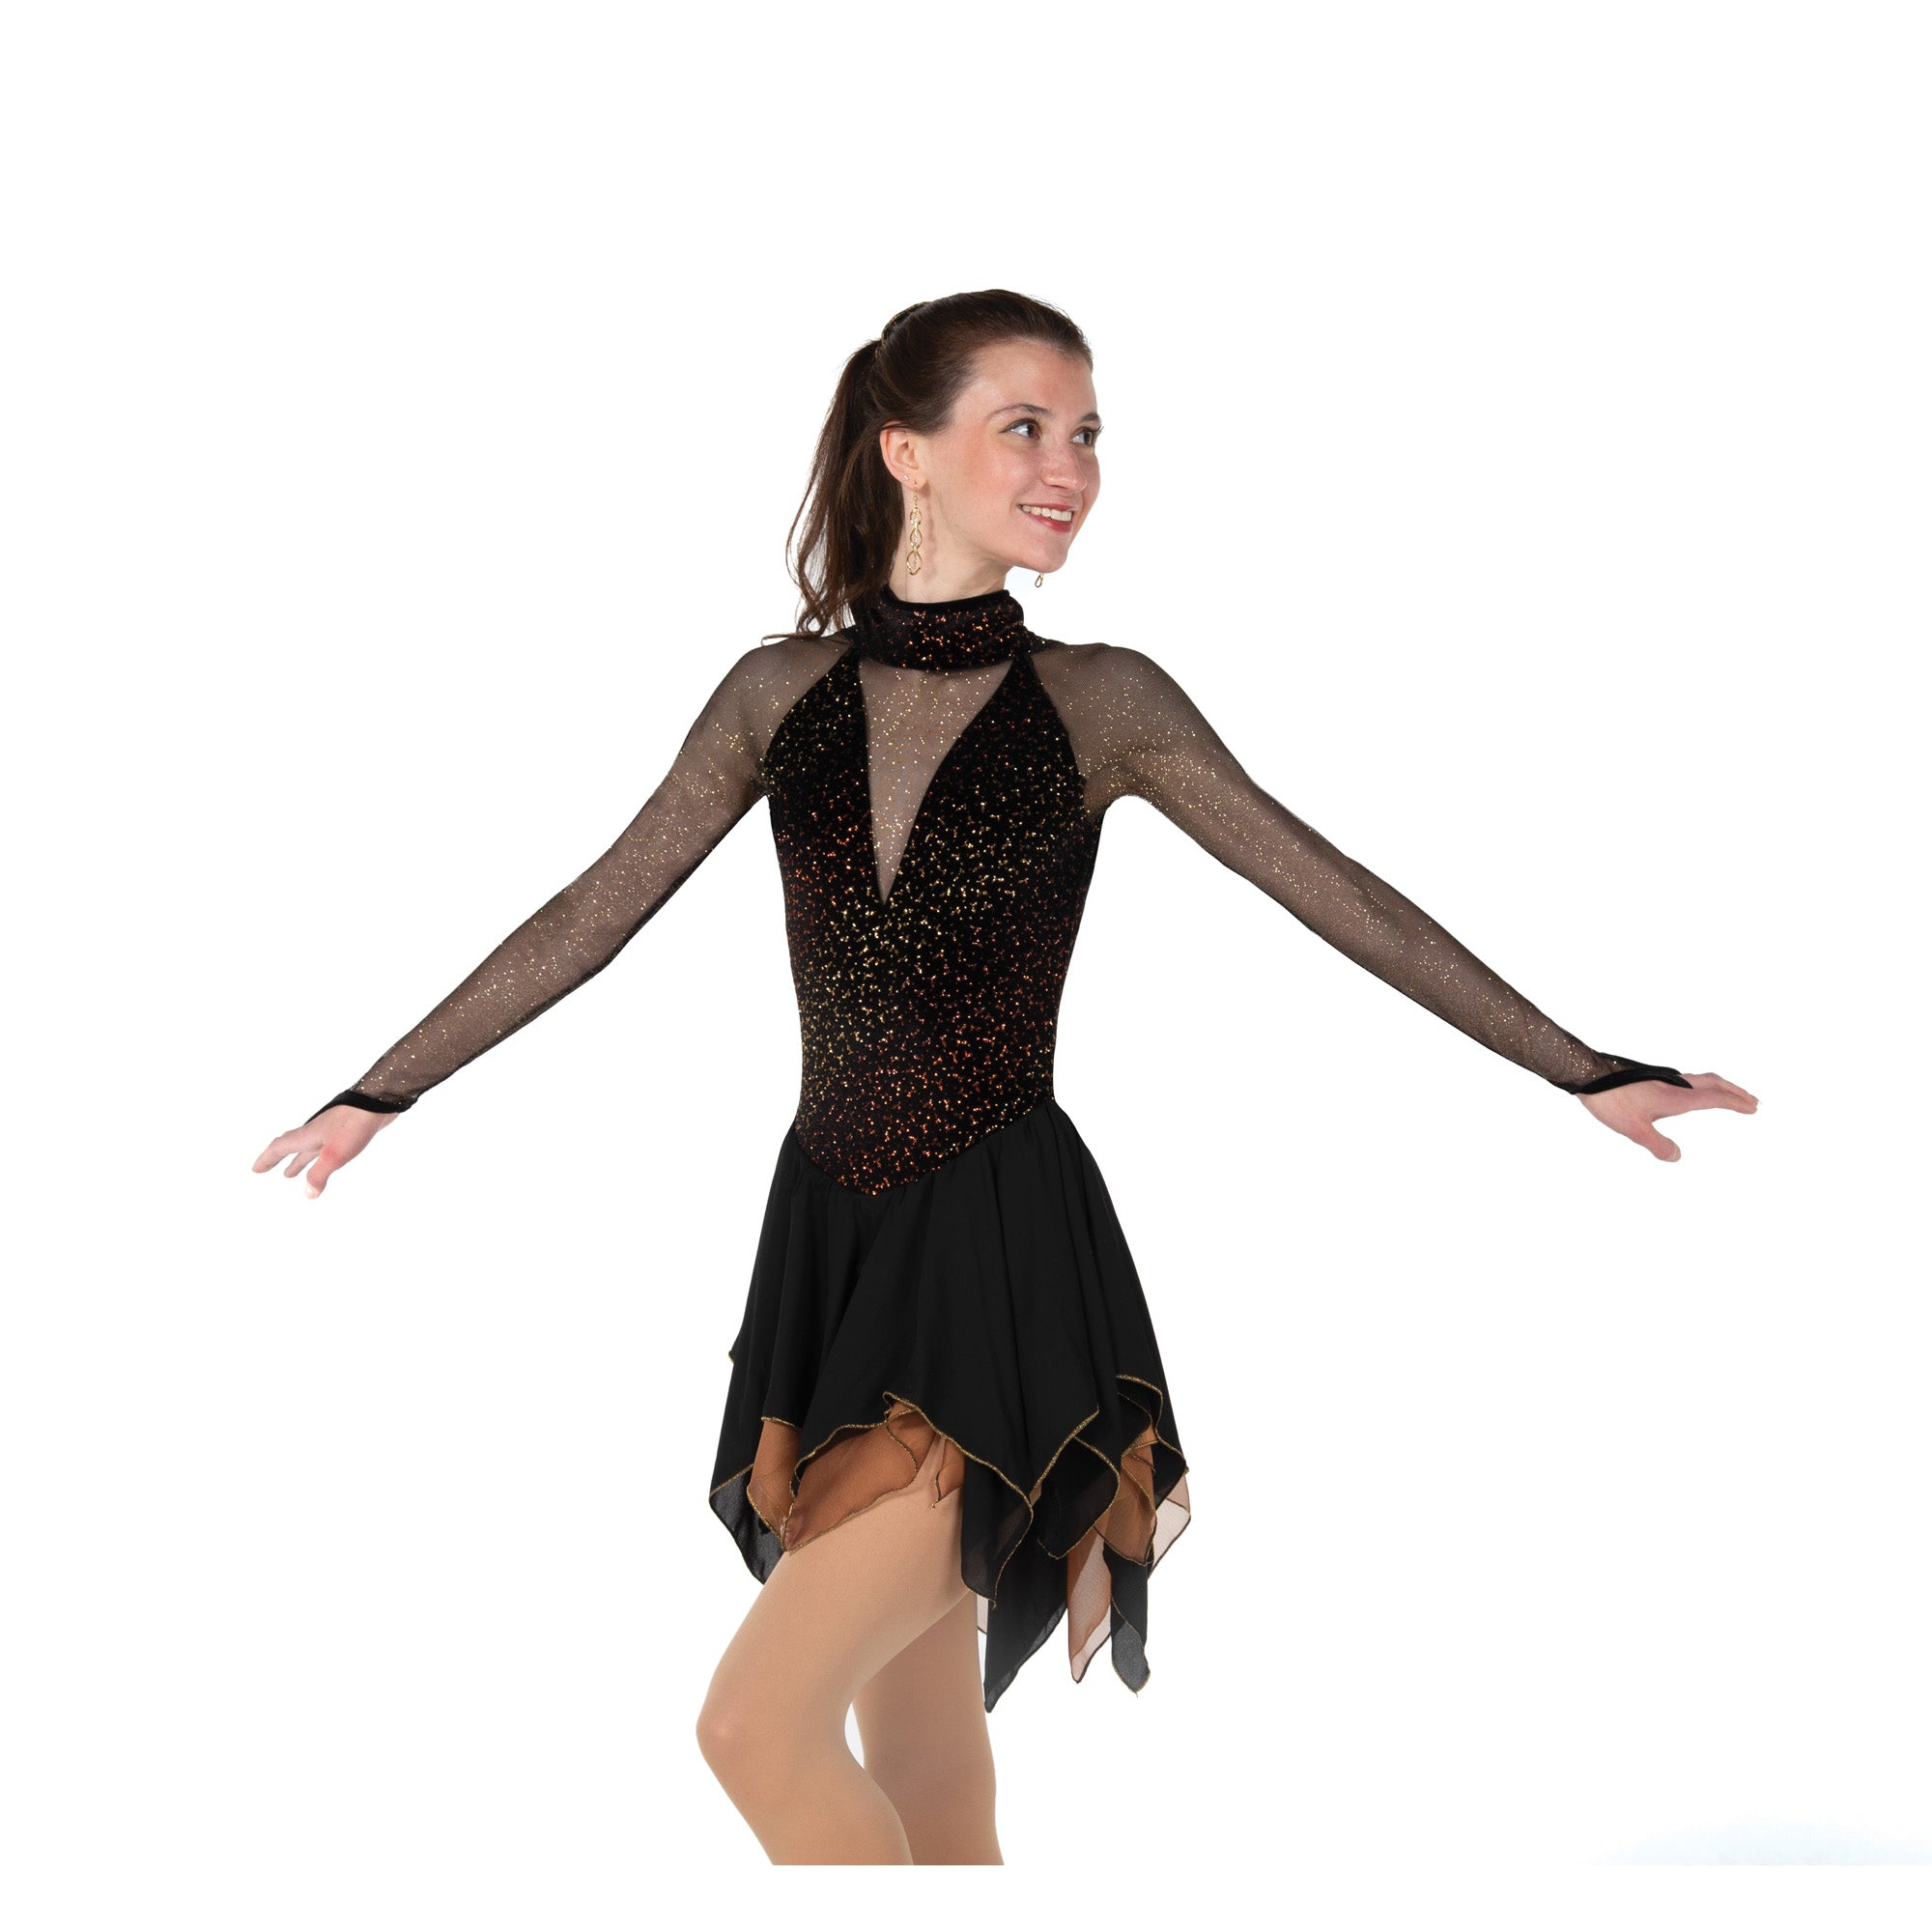 76 Blackened Bronze Skating Dress by Jerry's